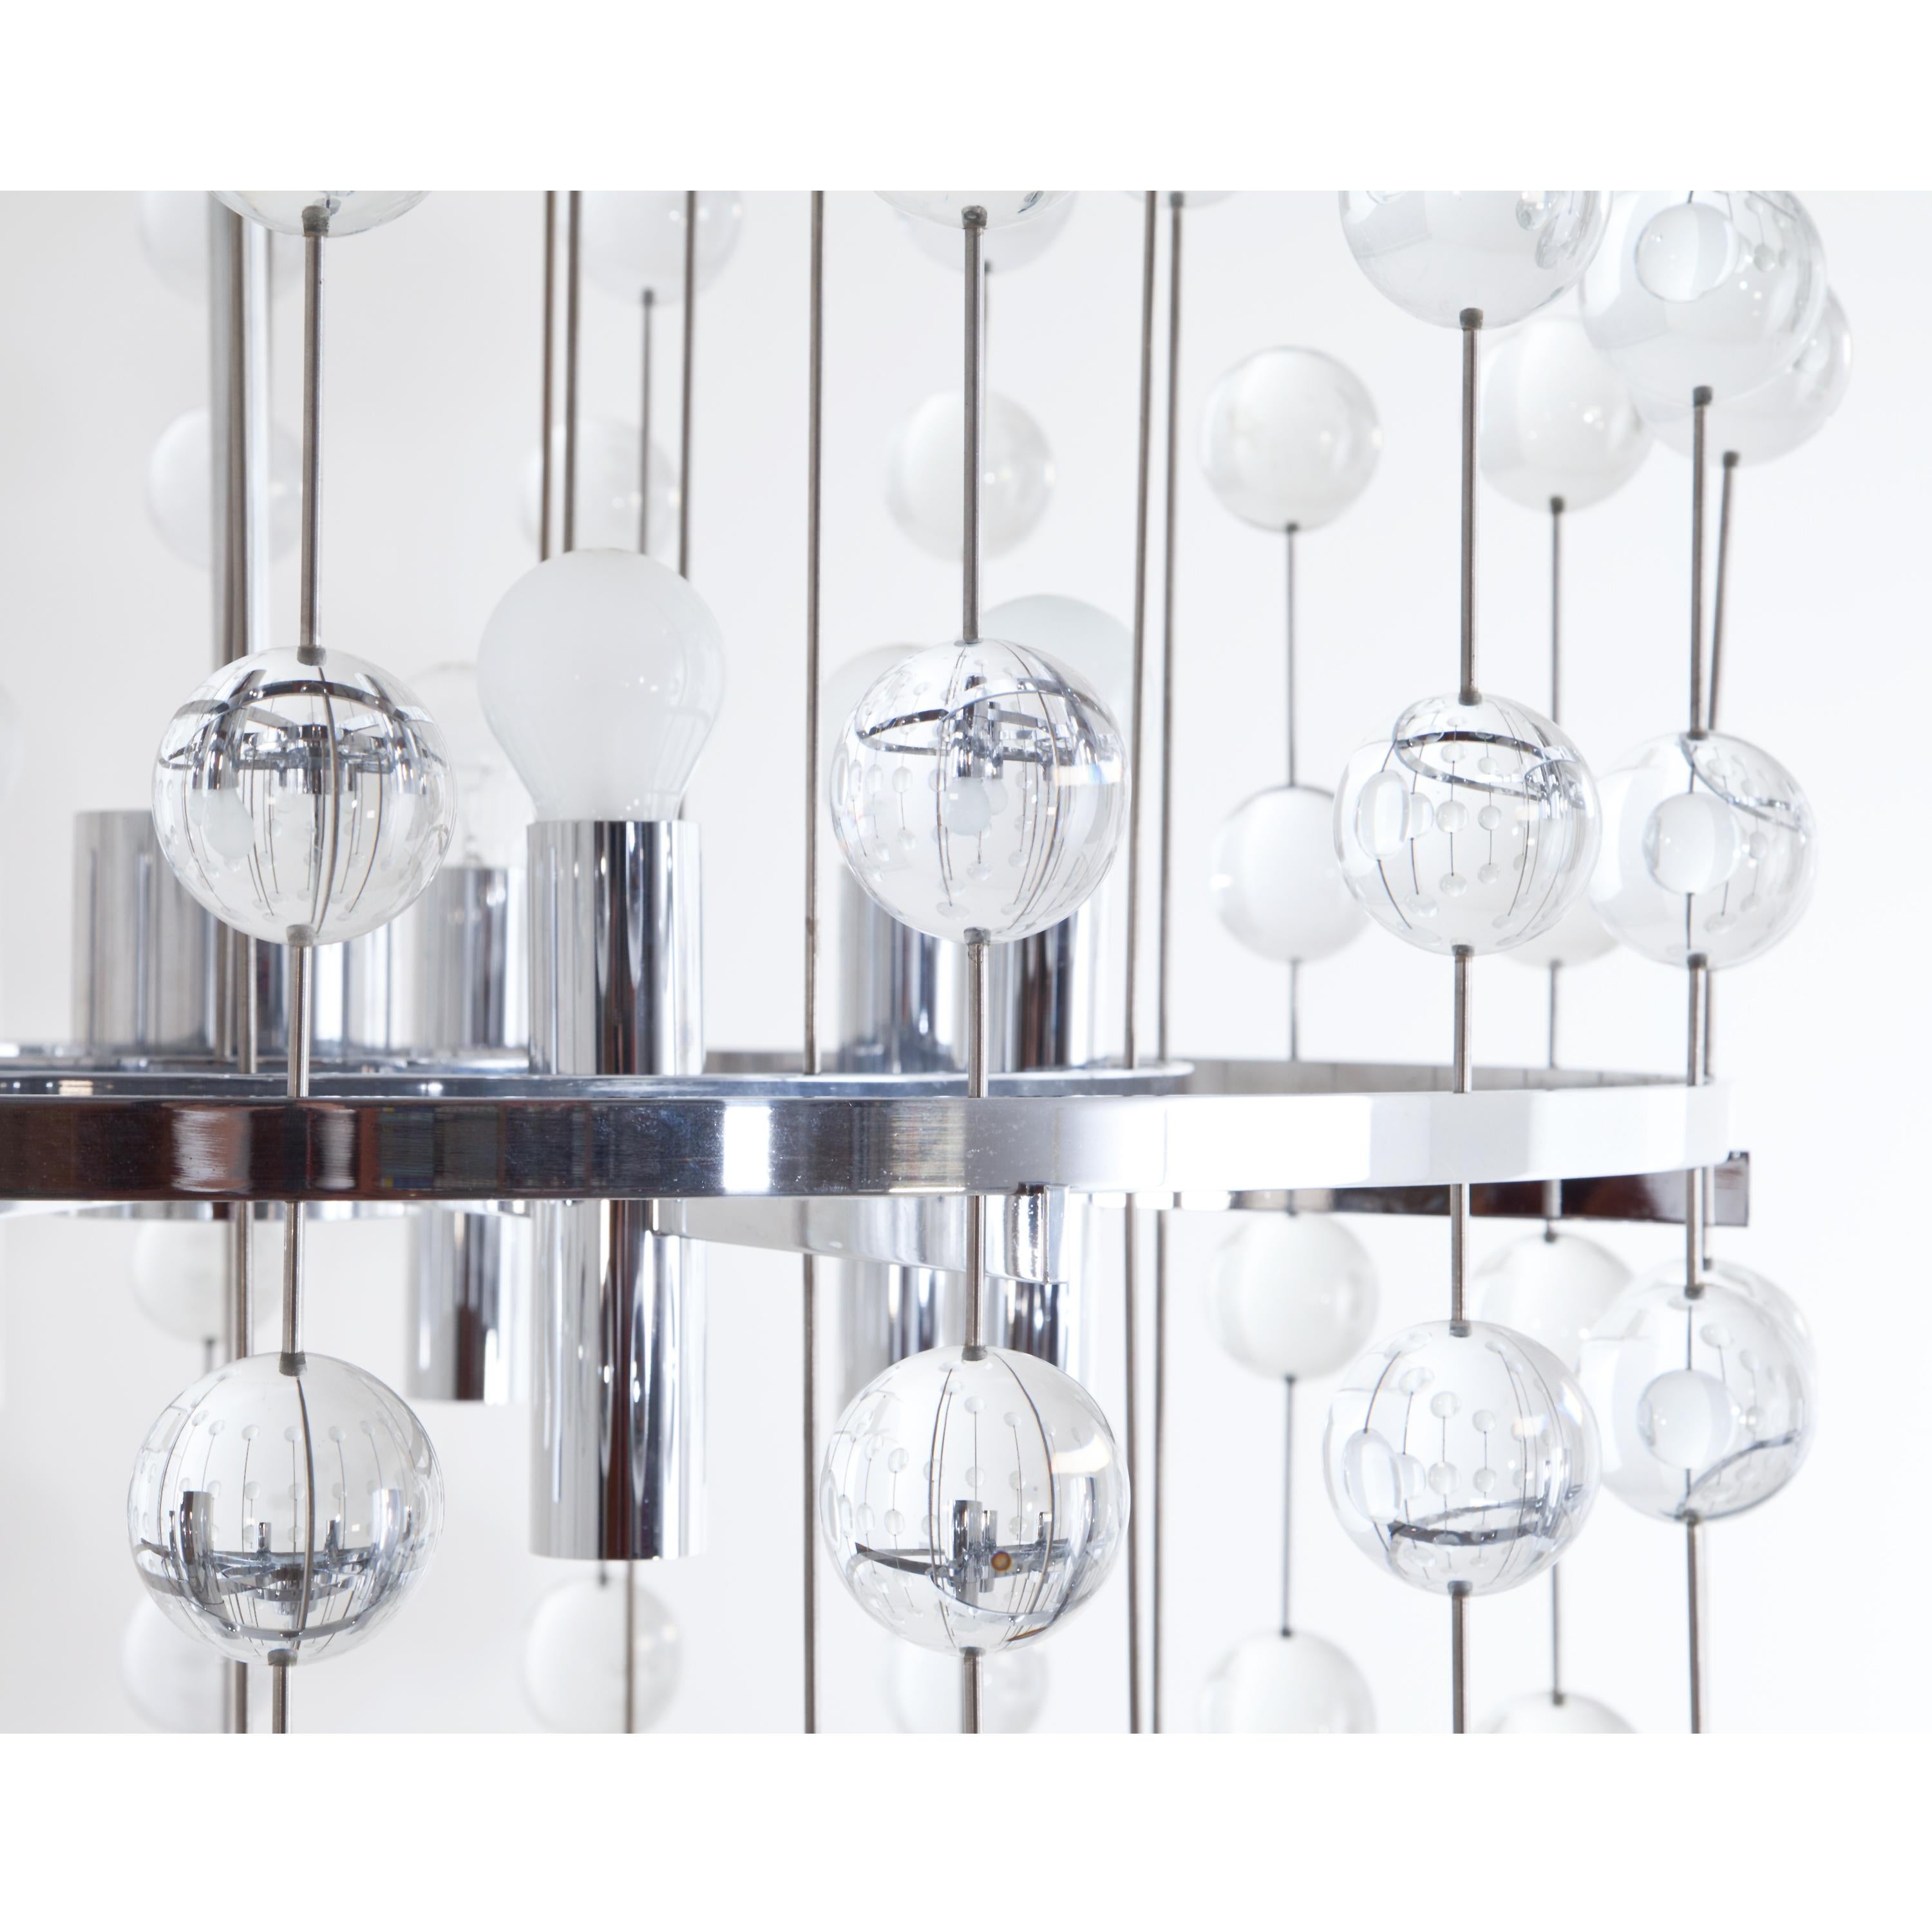 Late 20th Century Aloys F. Gangkofner Glass and Chromed Steel Chandelier, Munich, 1970s For Sale